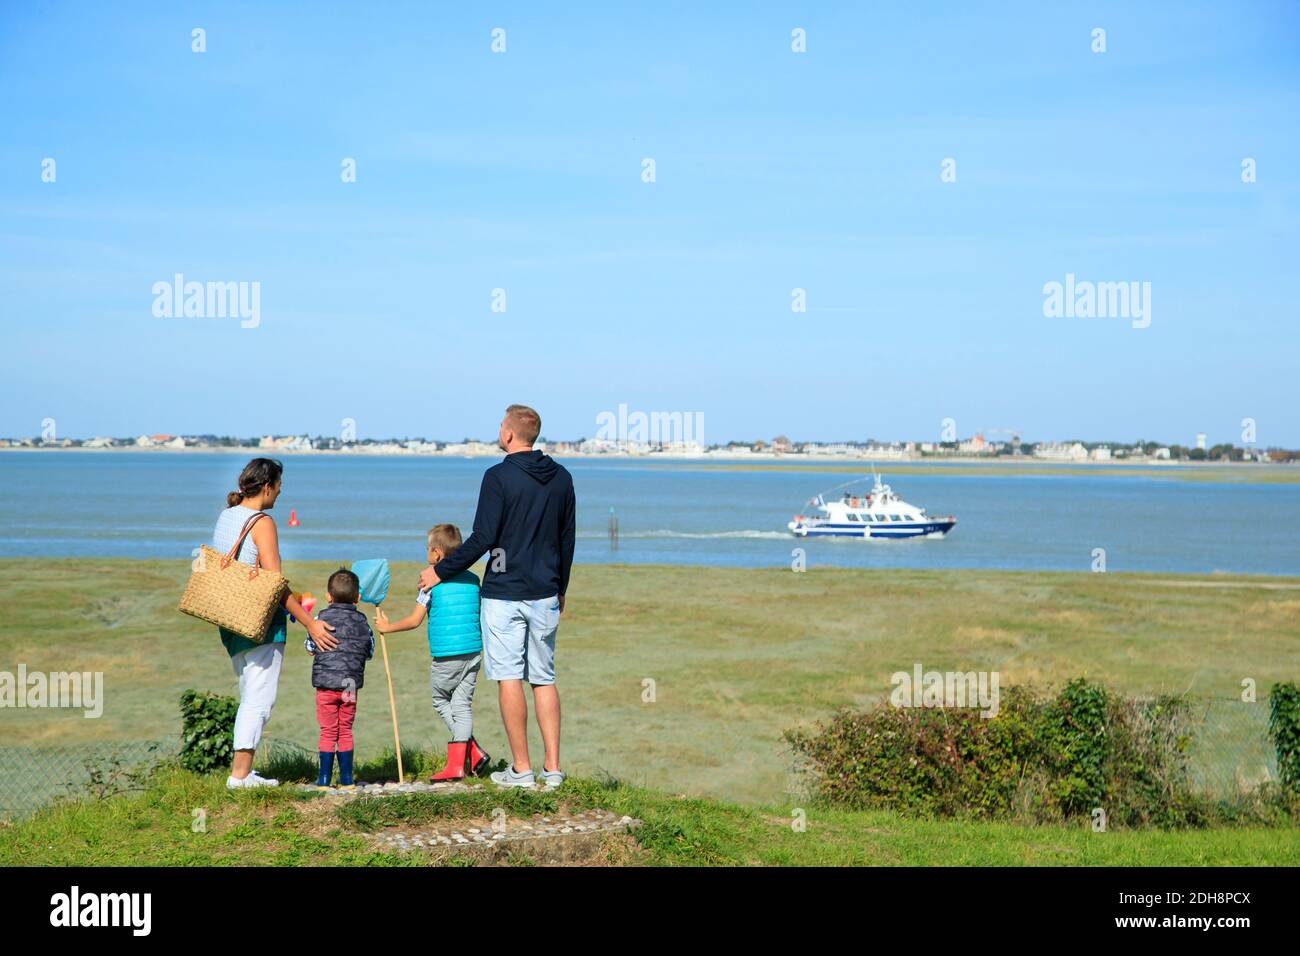 Somme Bay (northern France): family with two children facing the sea, looking at a sailboat on the water, in Saint-Valery-sur-Somme, along the coastal Stock Photo